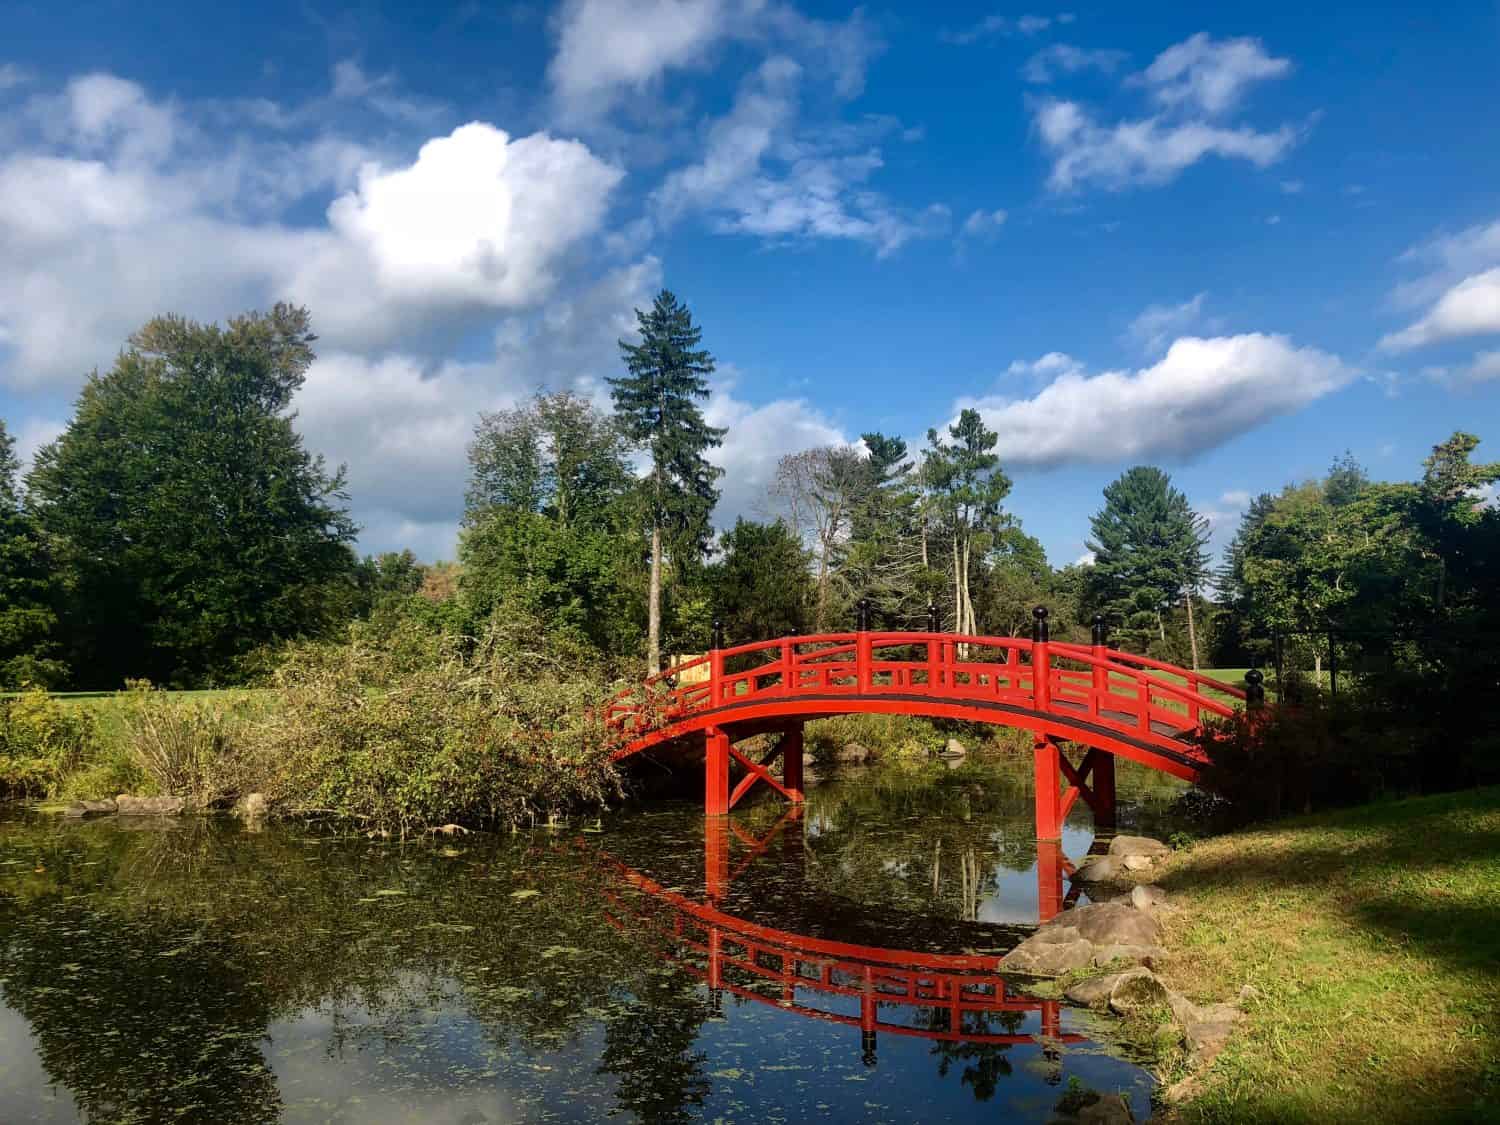 A wooden red oriental bridge in the Meditation Garden located at Duke Farms Wildlife Sanctuary in Hillsborough, New Jersey.